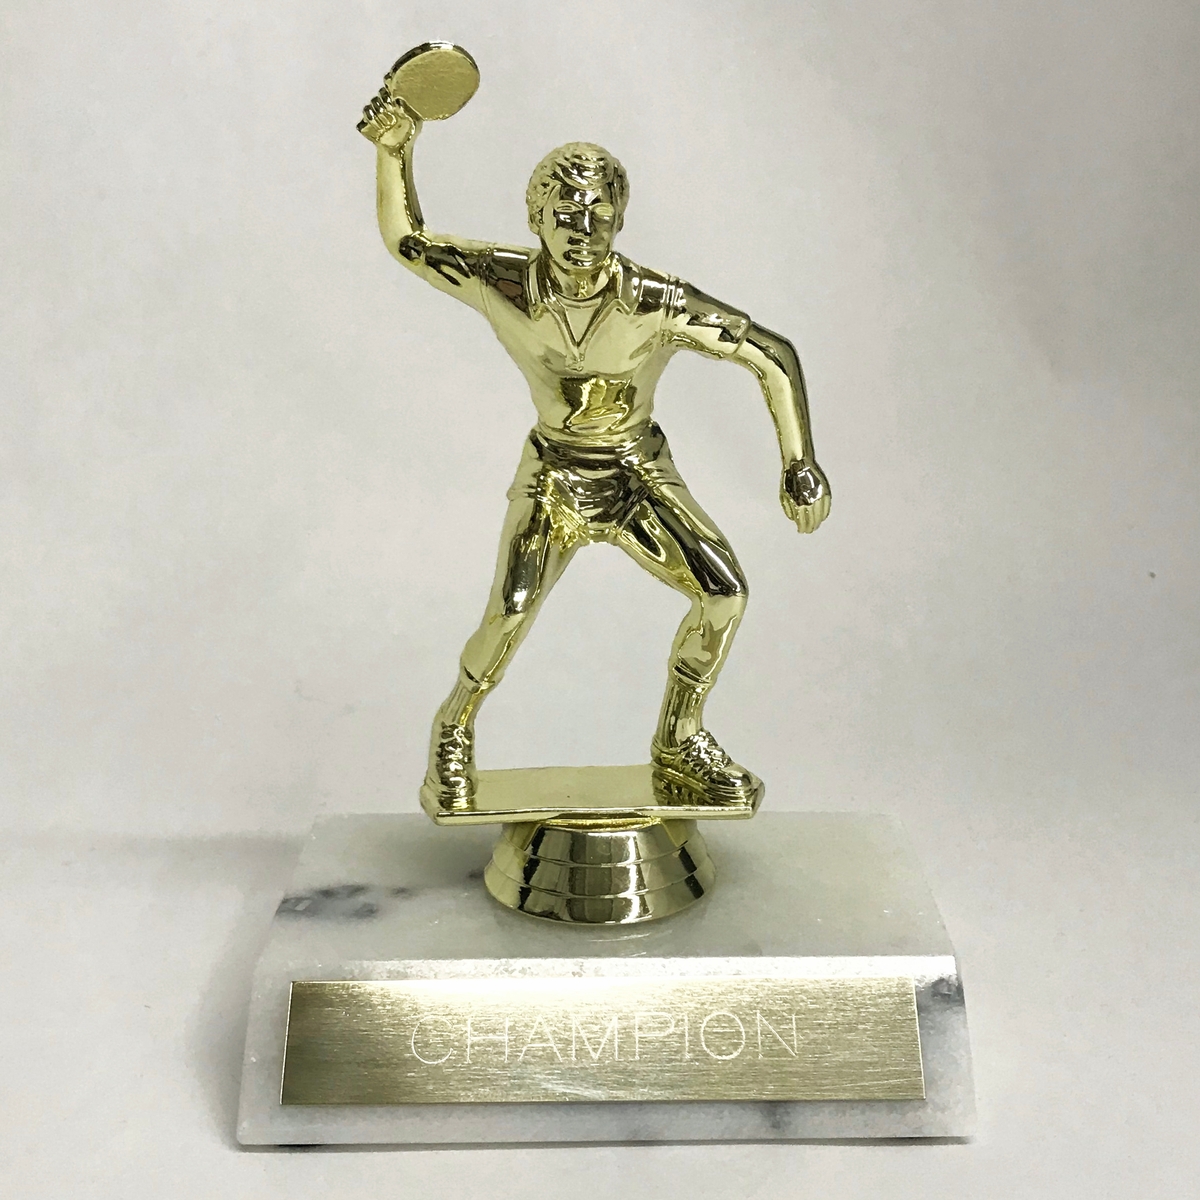 Slimming Award Trophy in 3 Sizes with FREE Engraving up to 30 Letters 